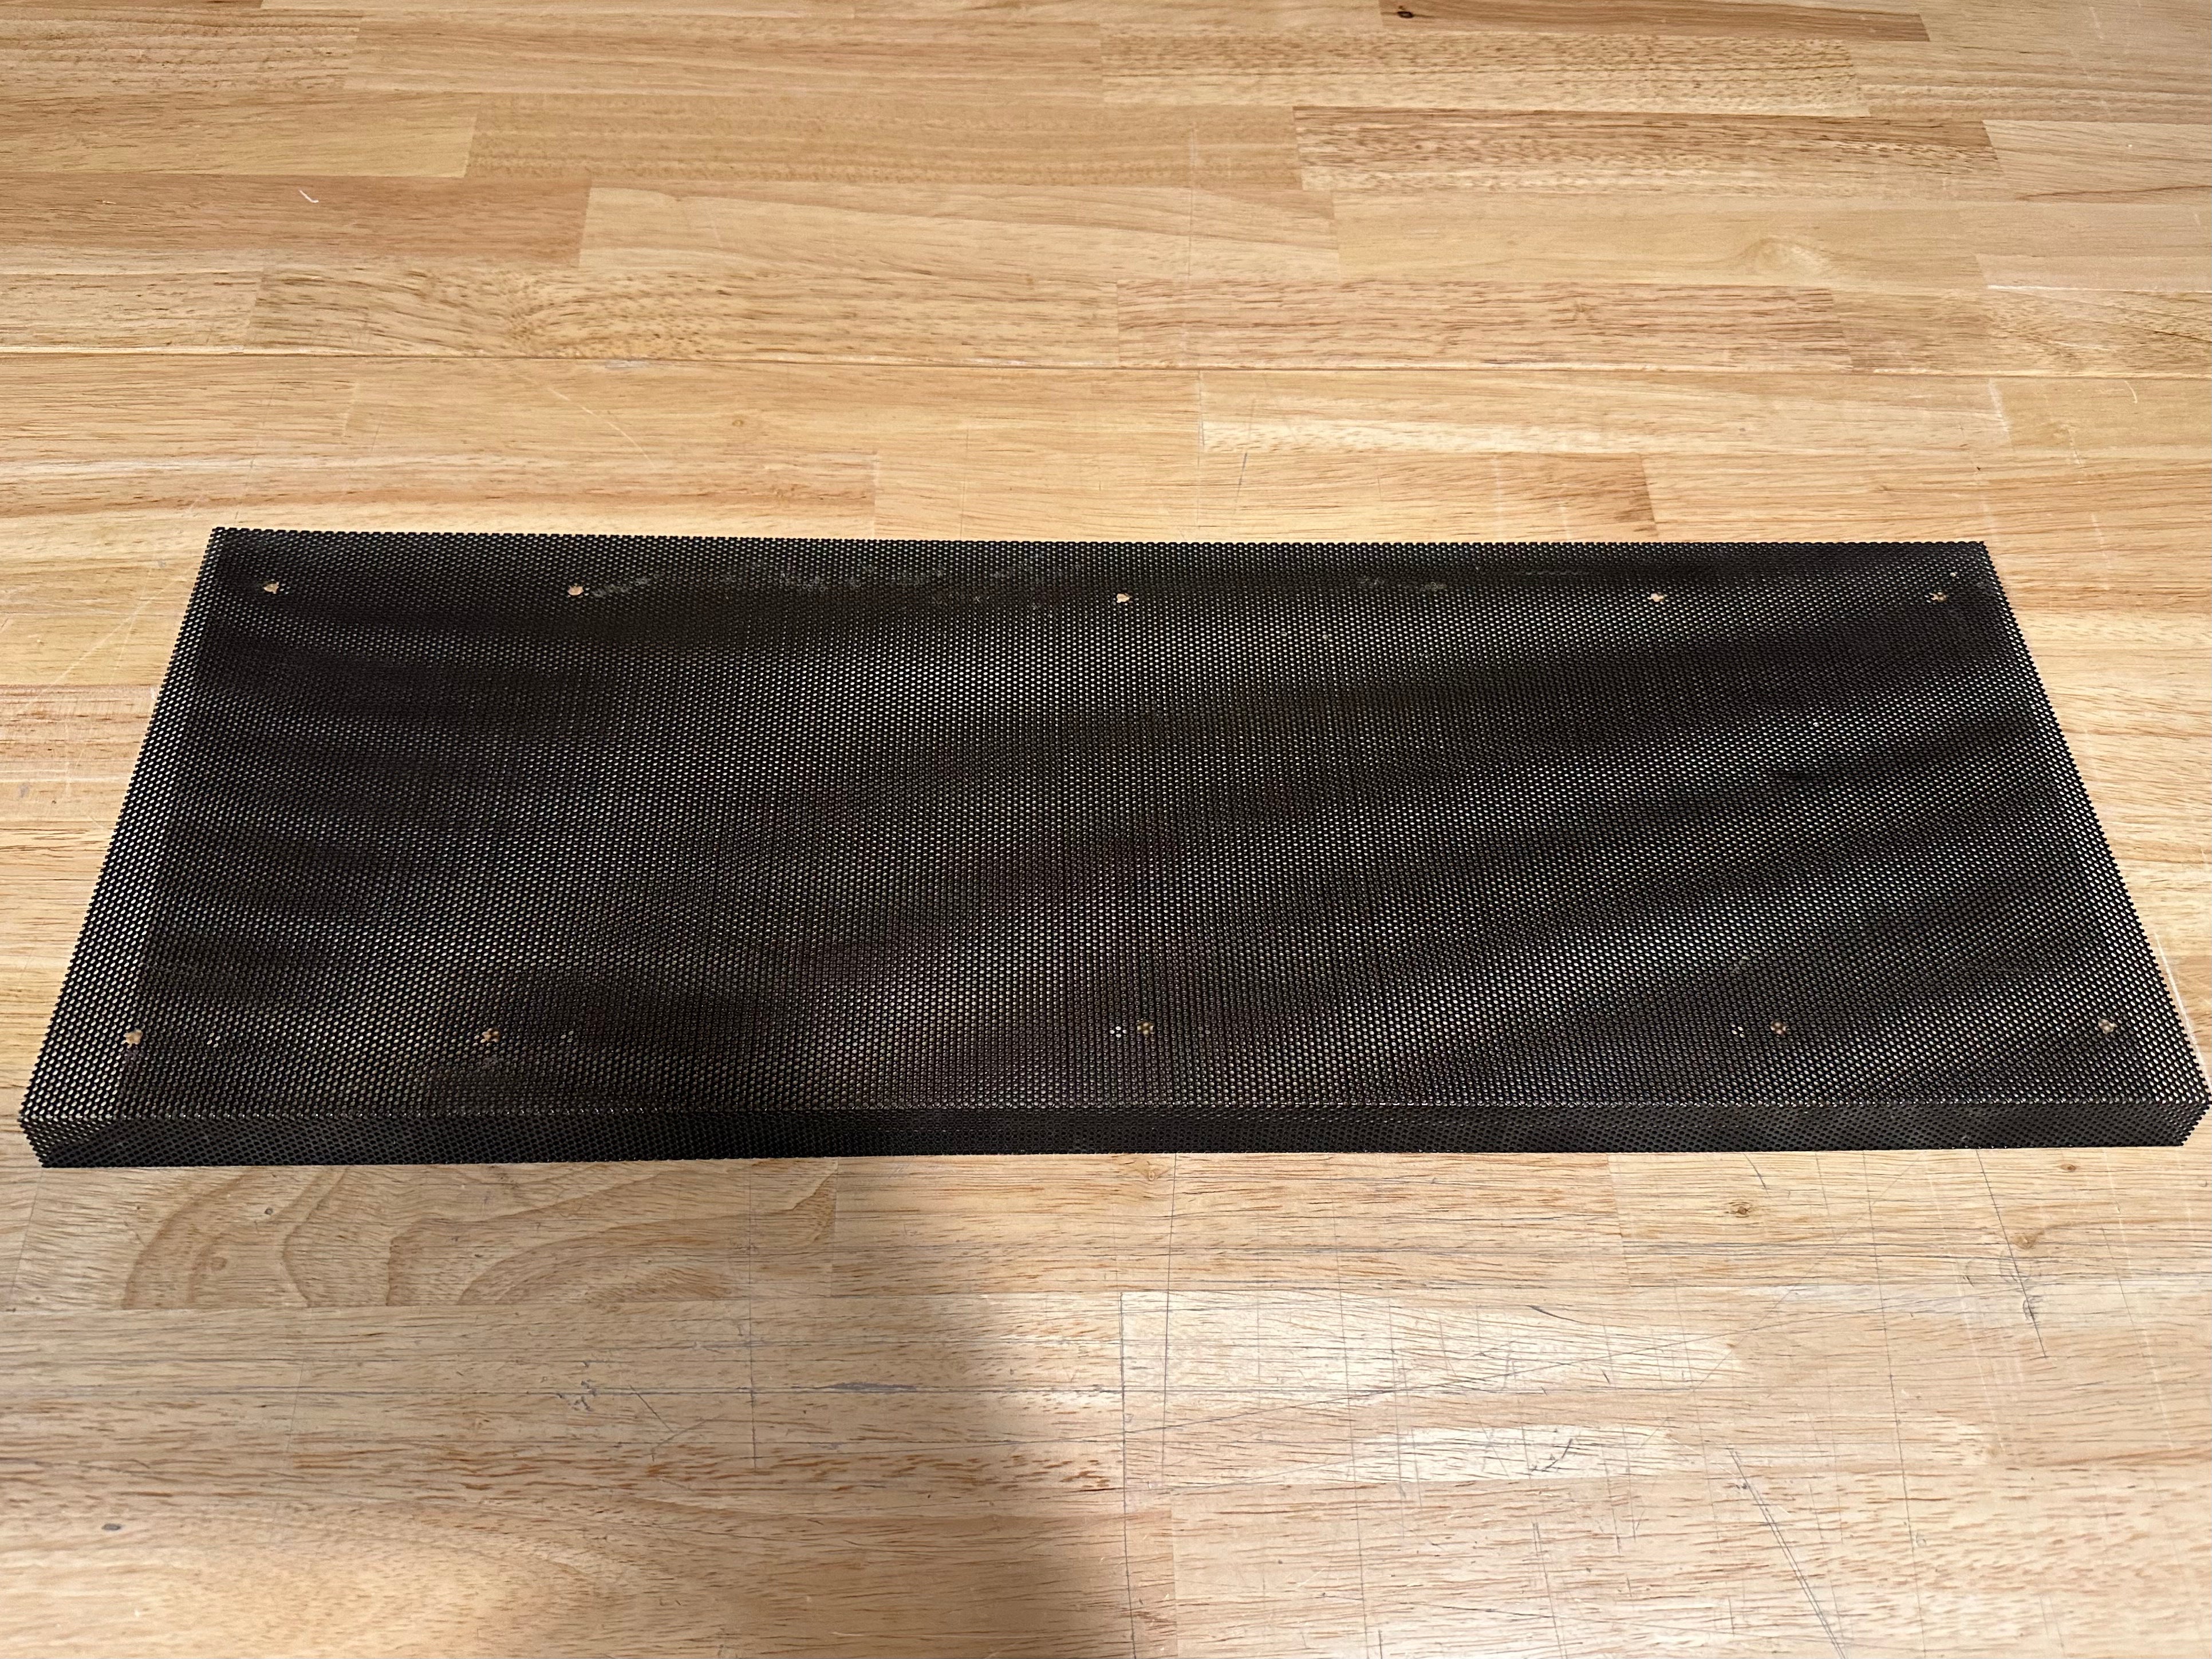 NOS 90’s Midway Speaker Grill for fighter cabinets